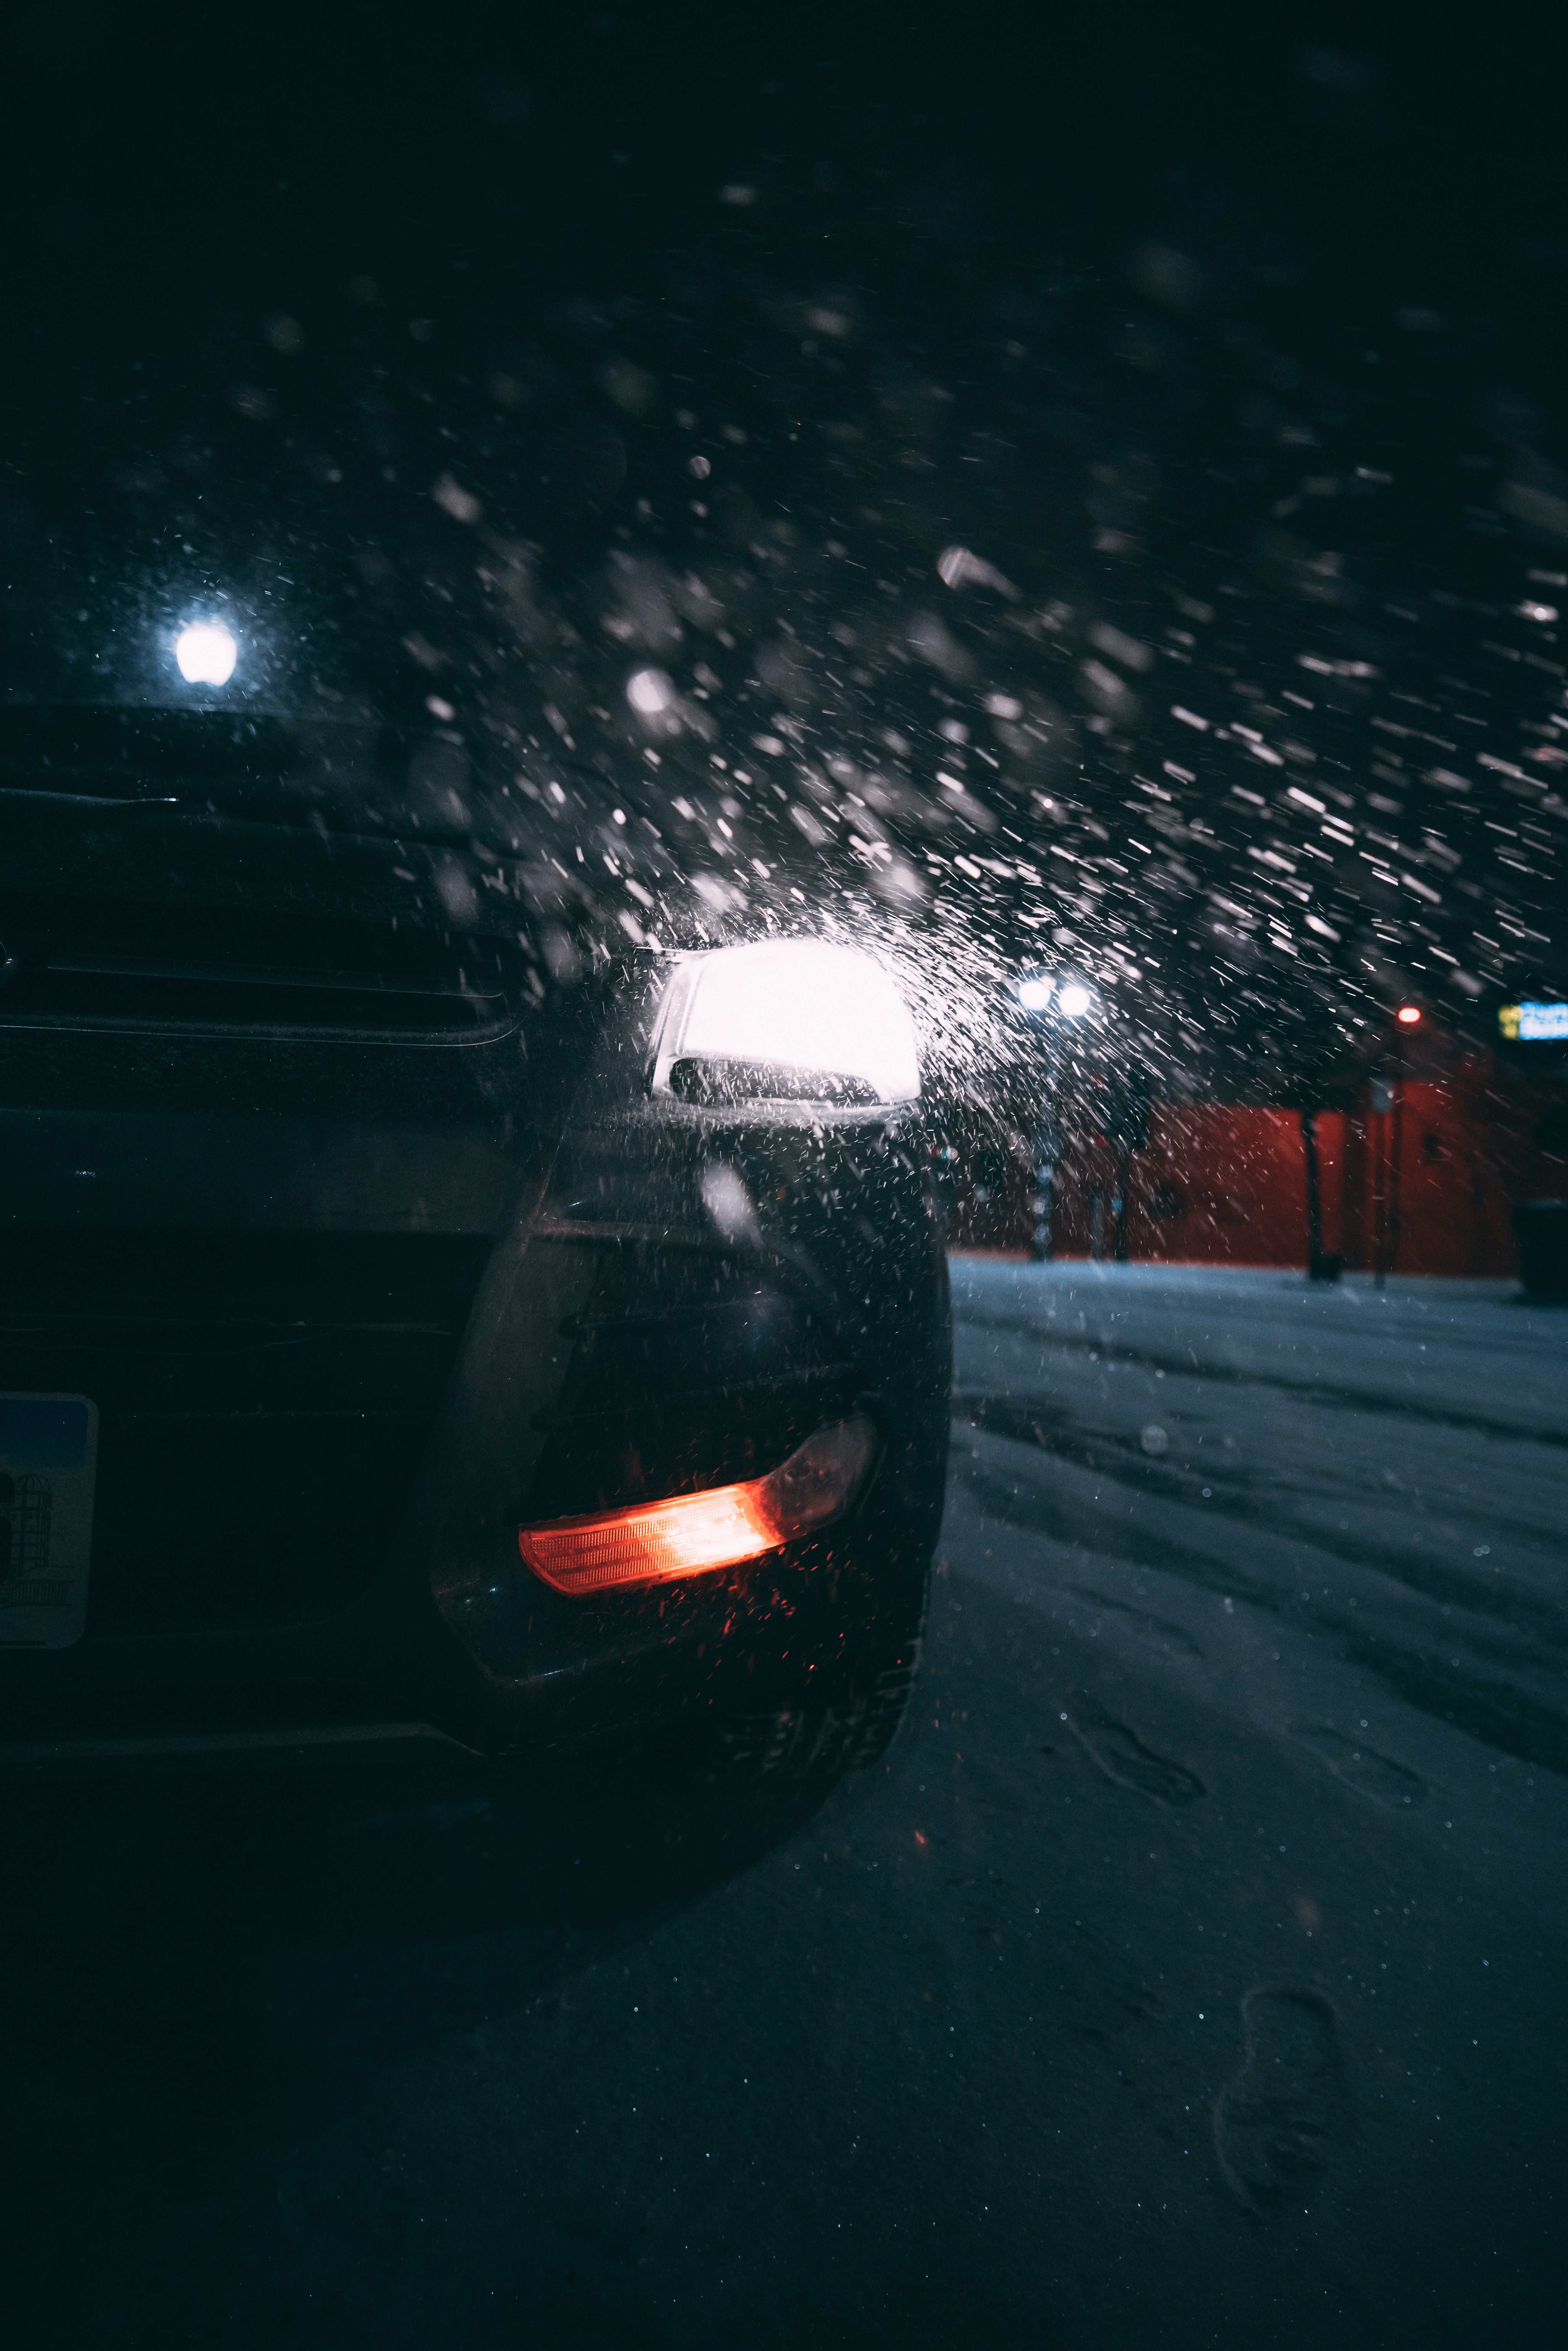 desktop Images night, snow, cars, lights, car, back view, rear view, headlights